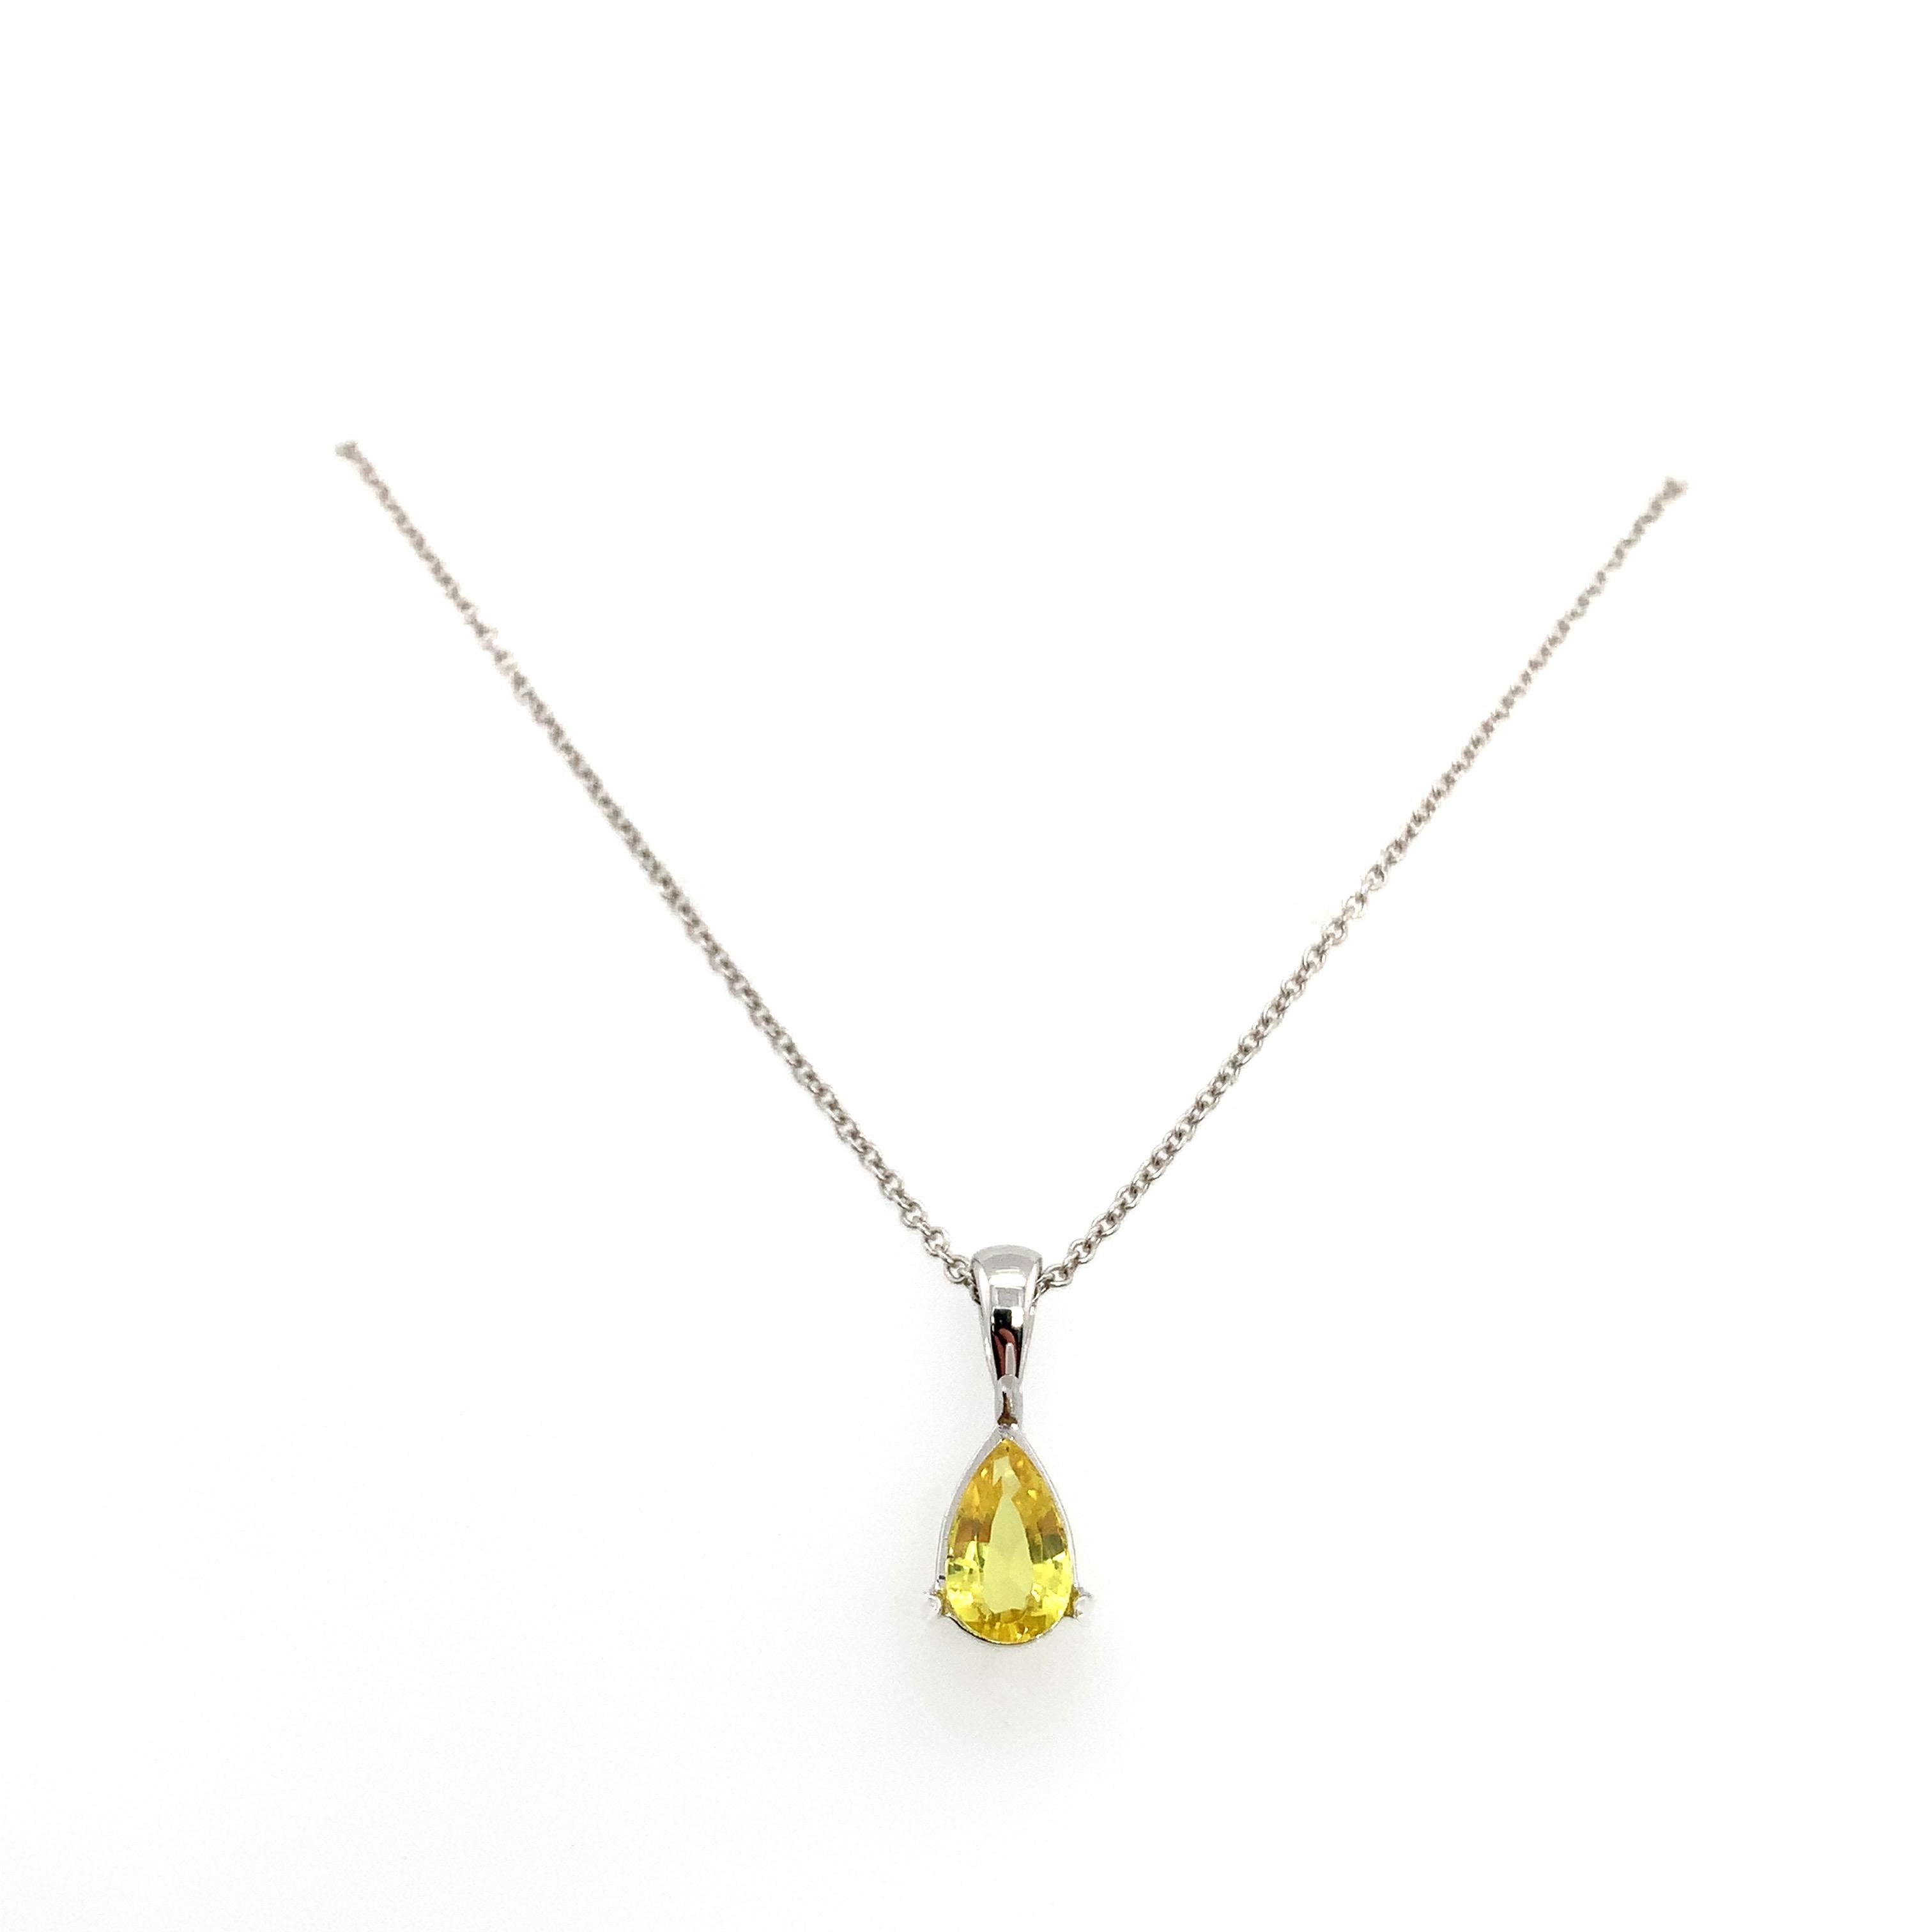 Yellow sapphire solitaire pendant necklace 18k white gold In New Condition For Sale In London, GB